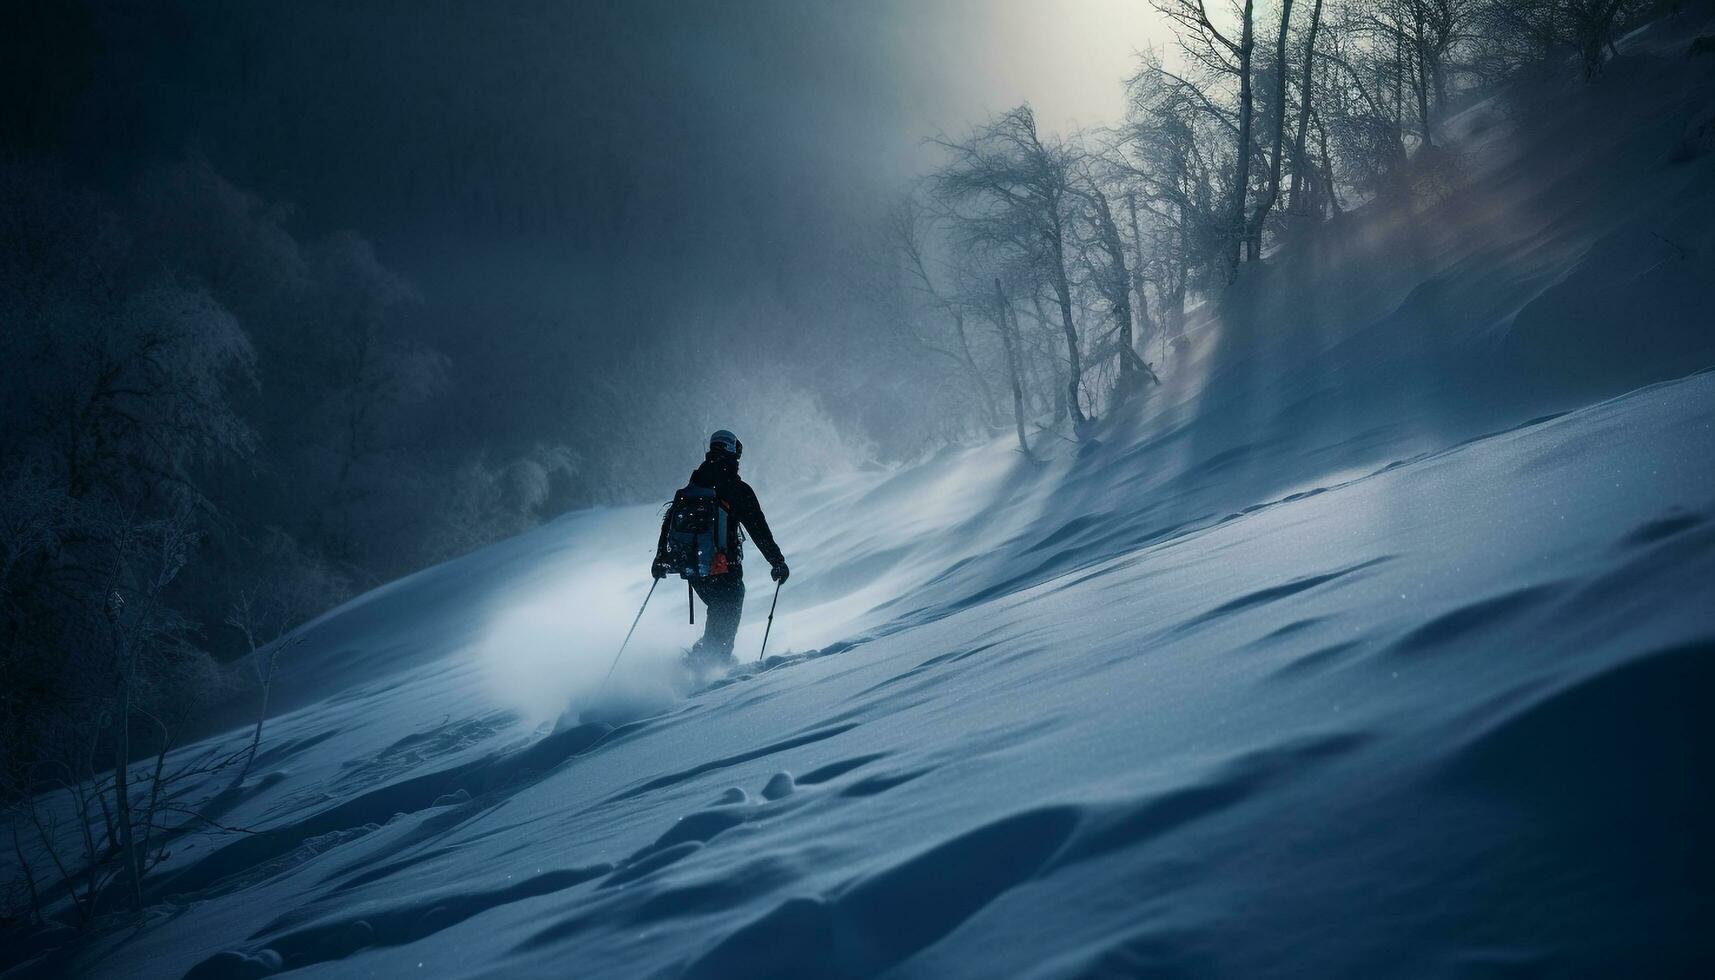 One person skiing down a snowy mountain generated by AI photo